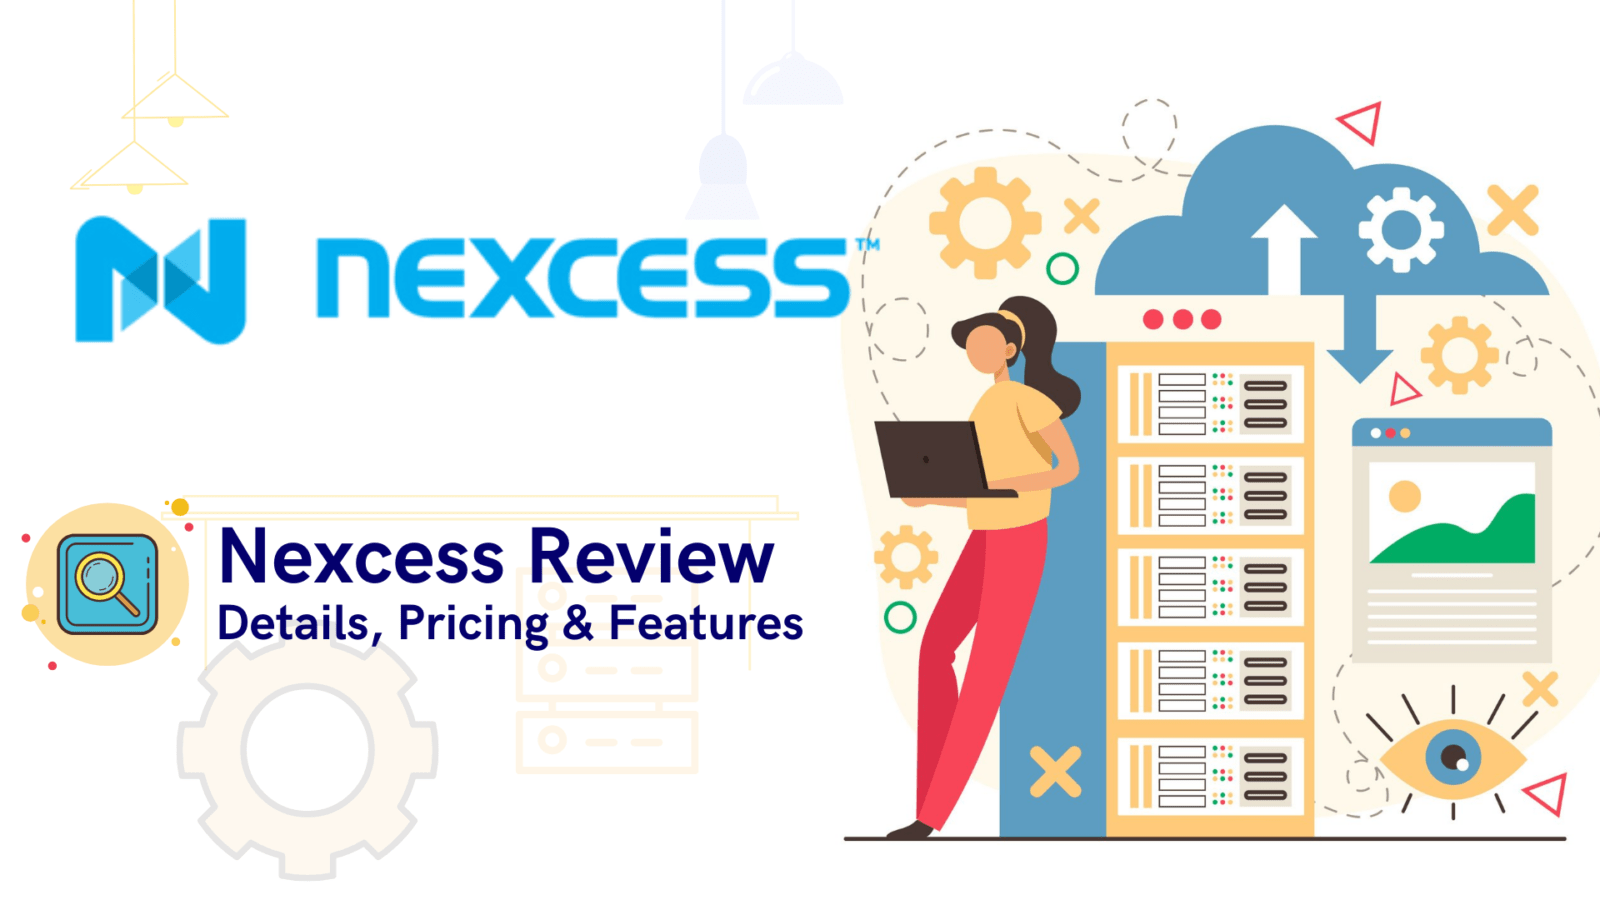 Nexcess Review 2022 Details, Pricing, & Features